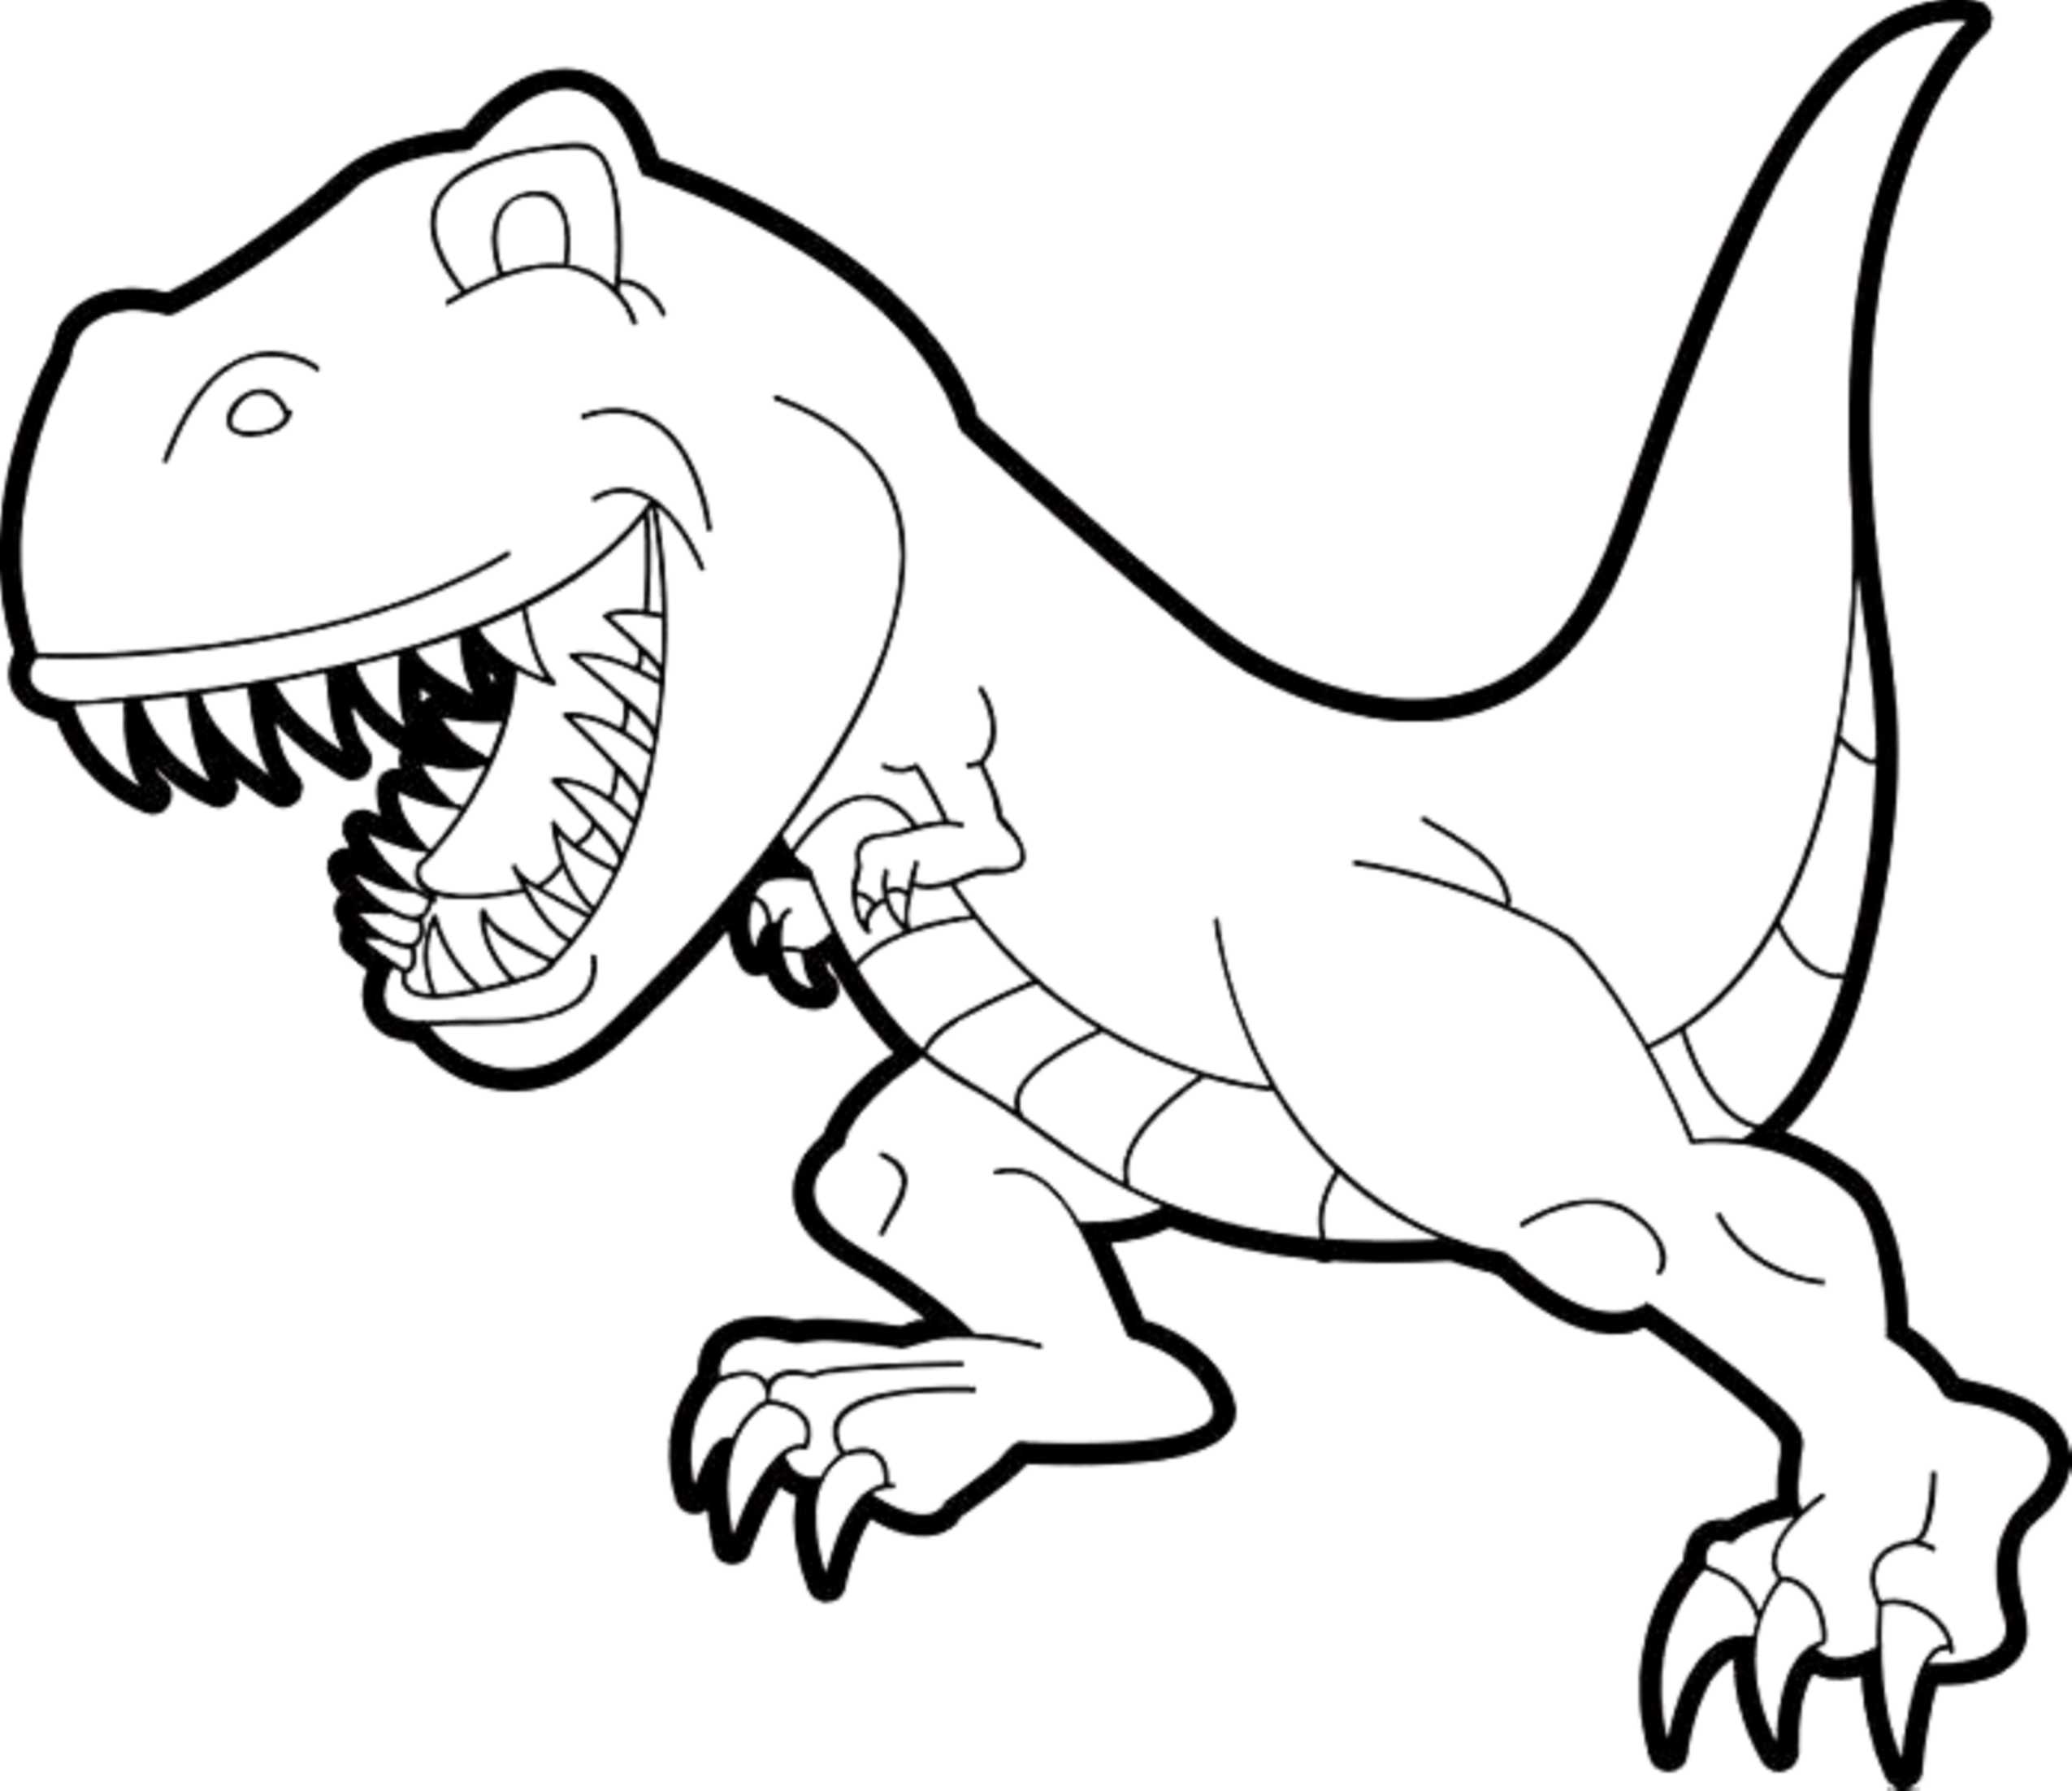 Download Print & Download - Dinosaur T-Rex Coloring Pages for Kids